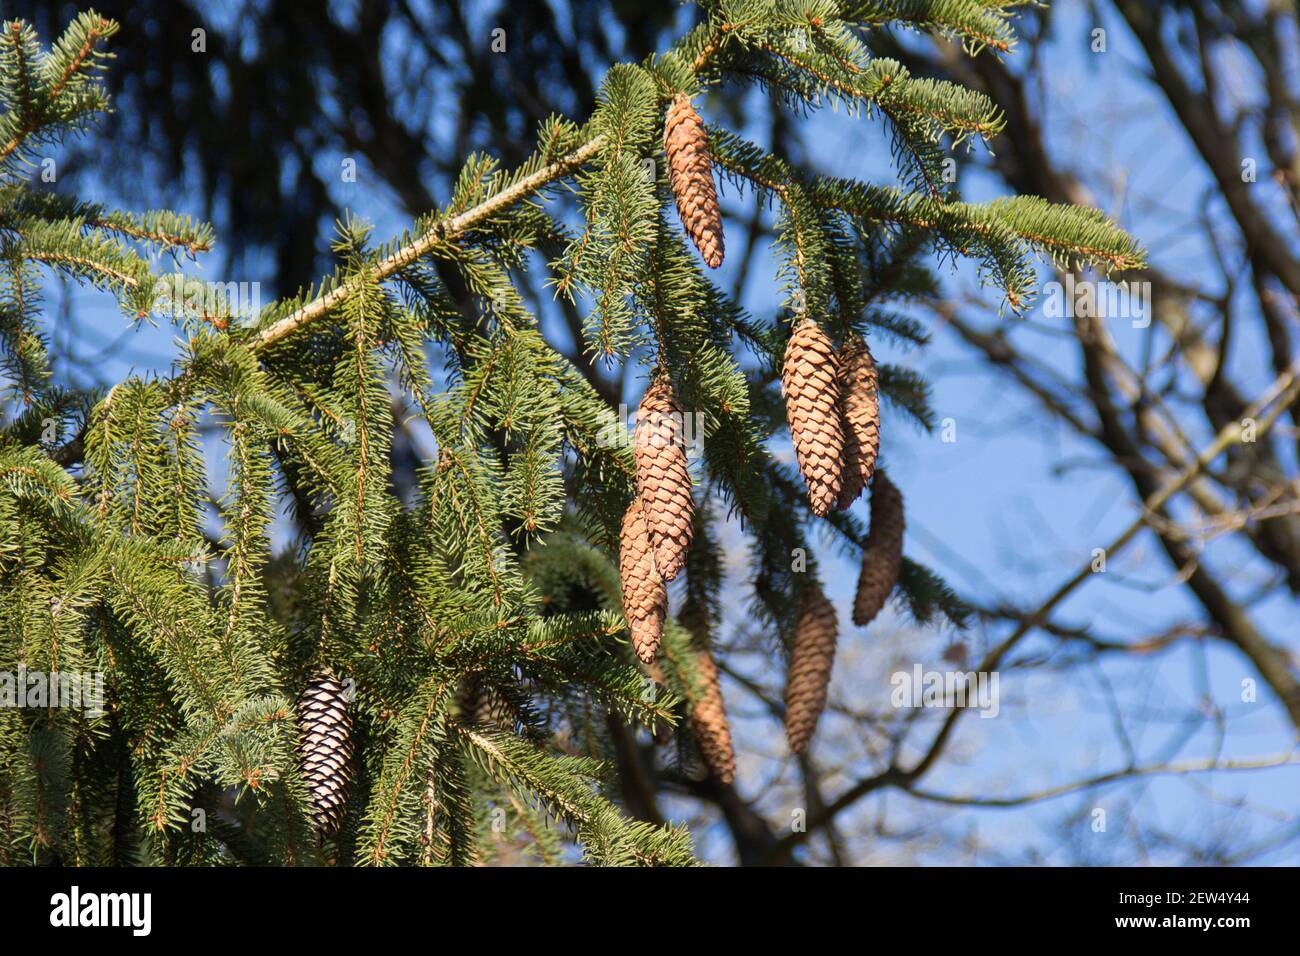 Pinecone on Conifer in front of Blue Sky. Close up of Pinecones hanging on Needle Branch. Stock Photo